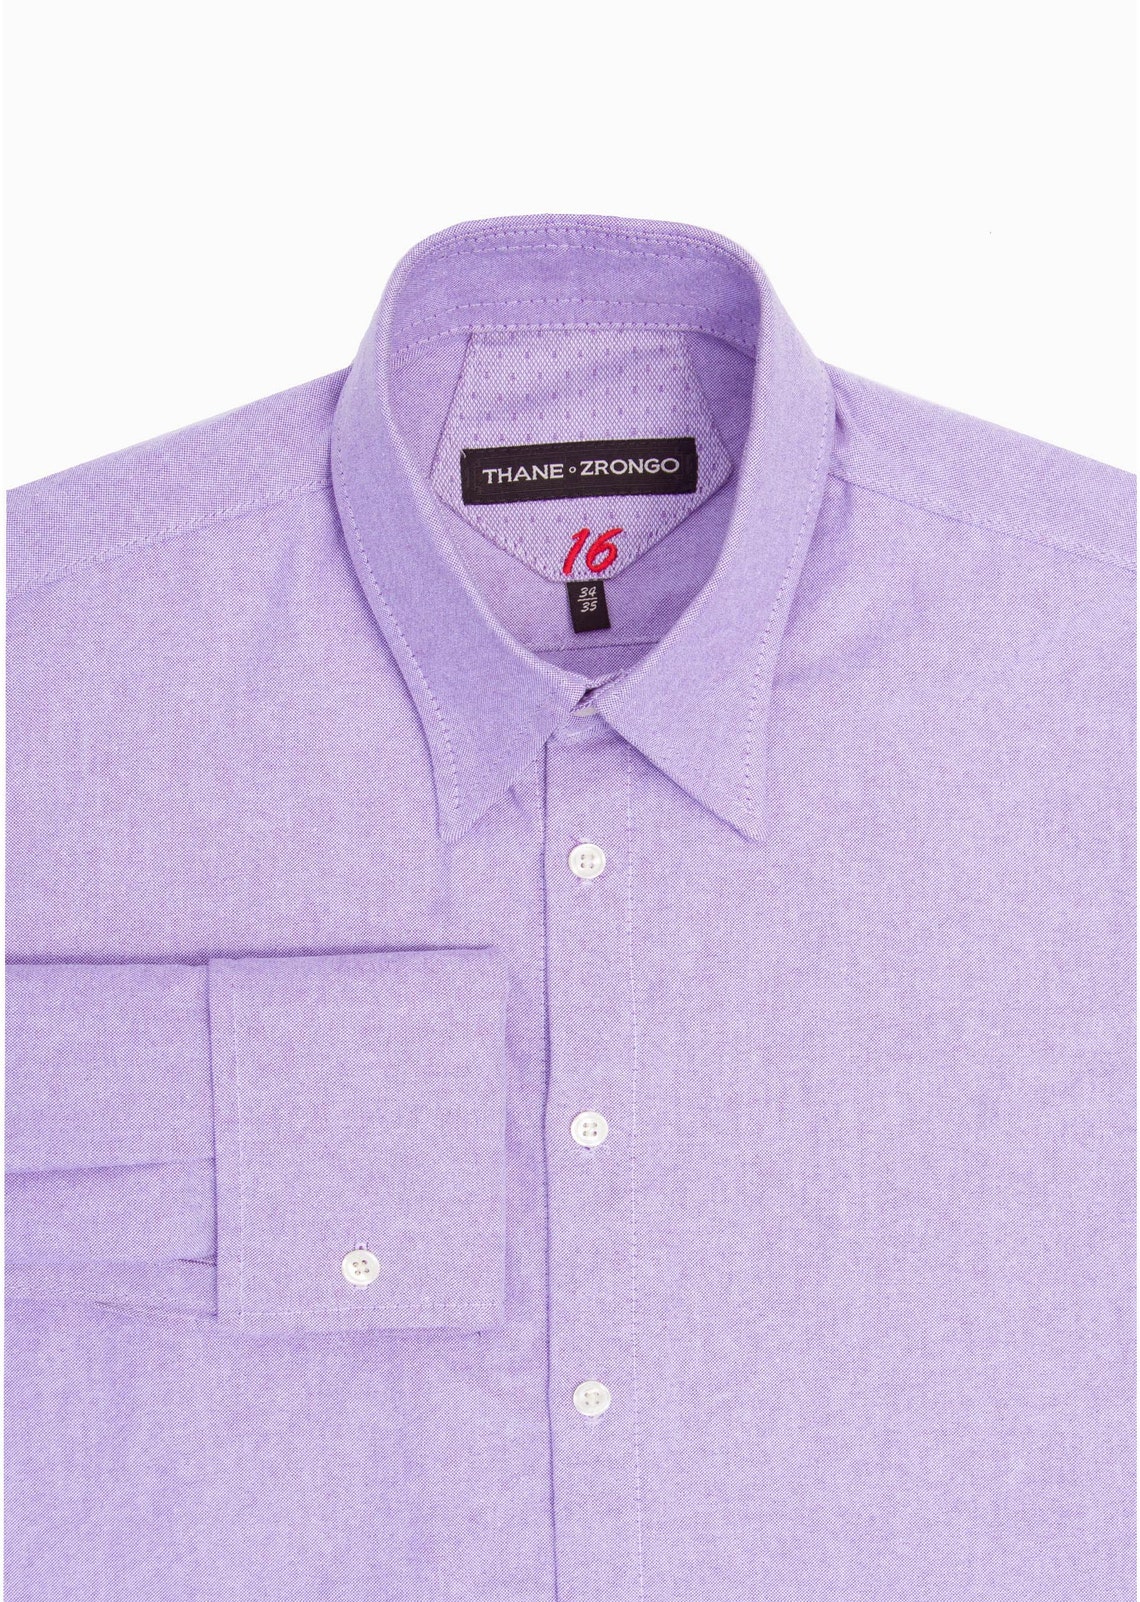 Light Muted Purple Lavender Oxford Pinpoint 100% Cotton Shirt - Etsy